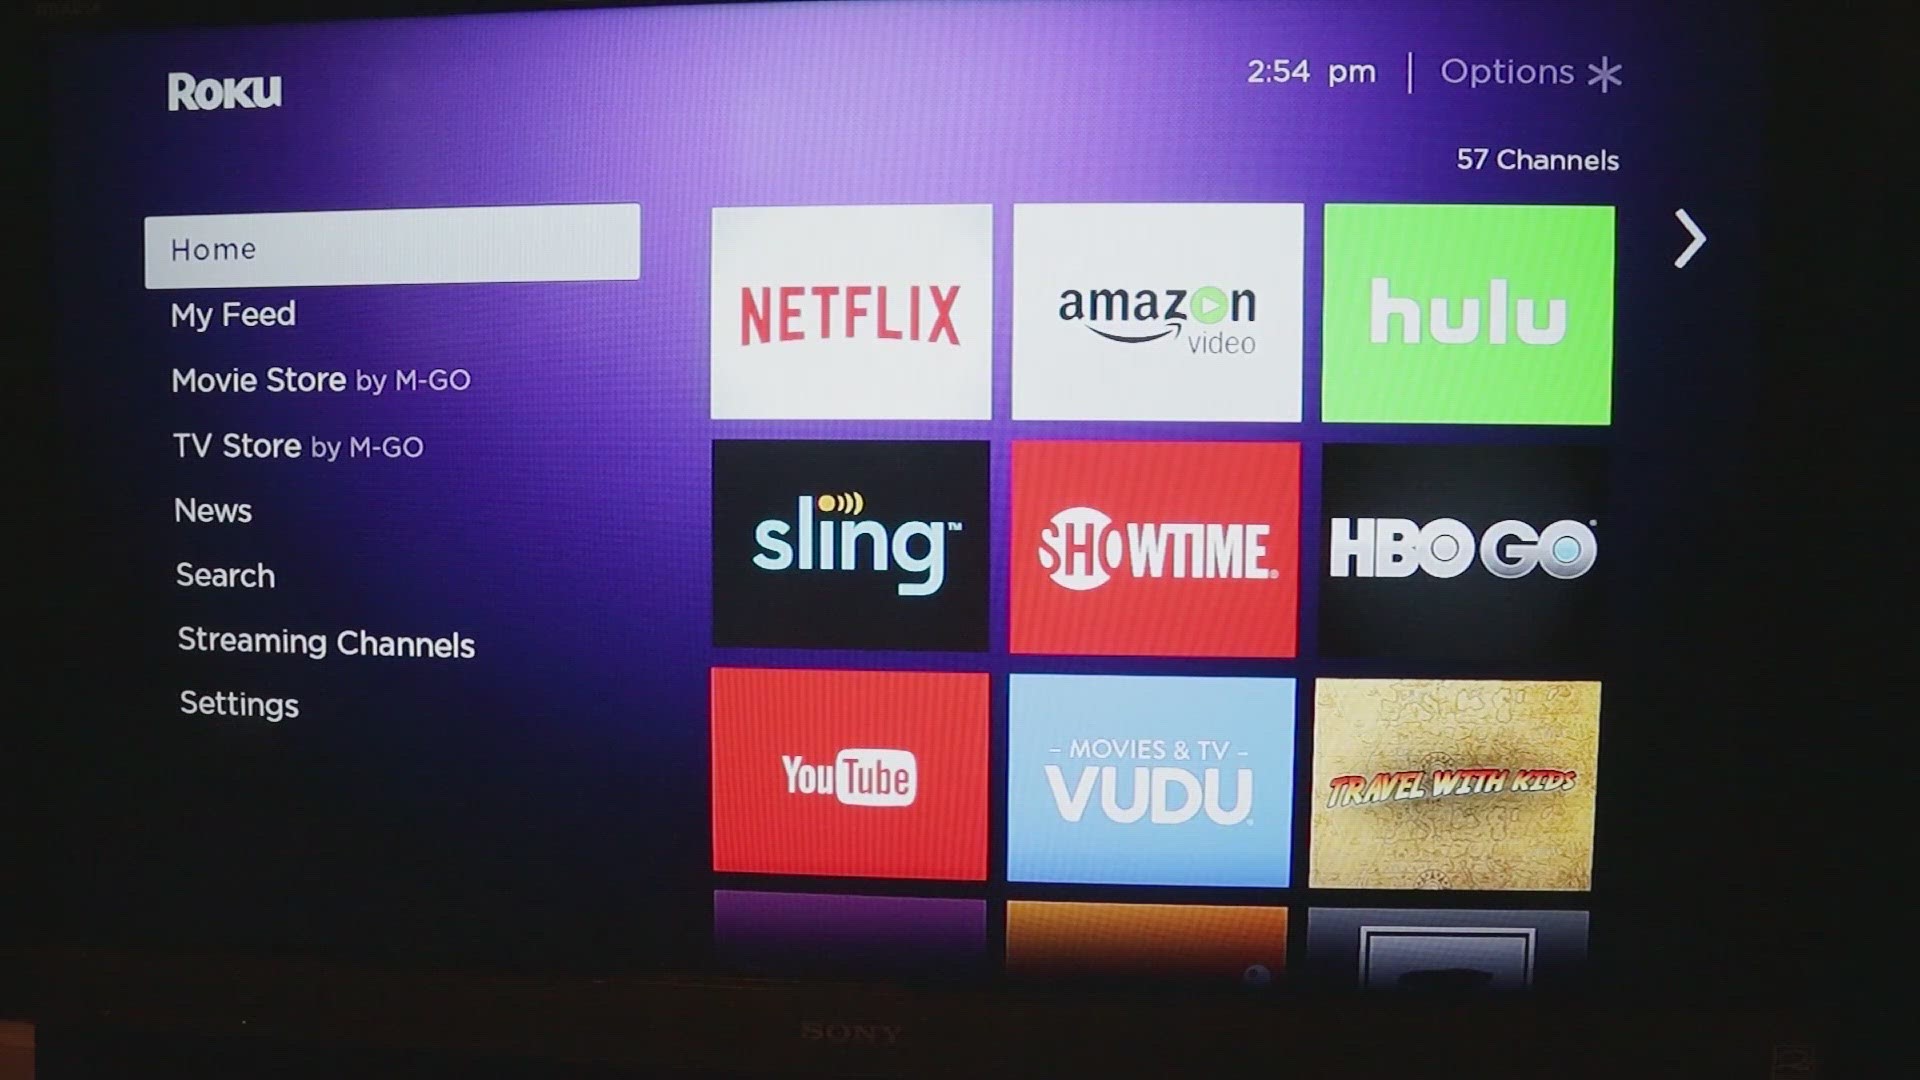 Roku says that hackers gained access to user accounts through stolen passwords.